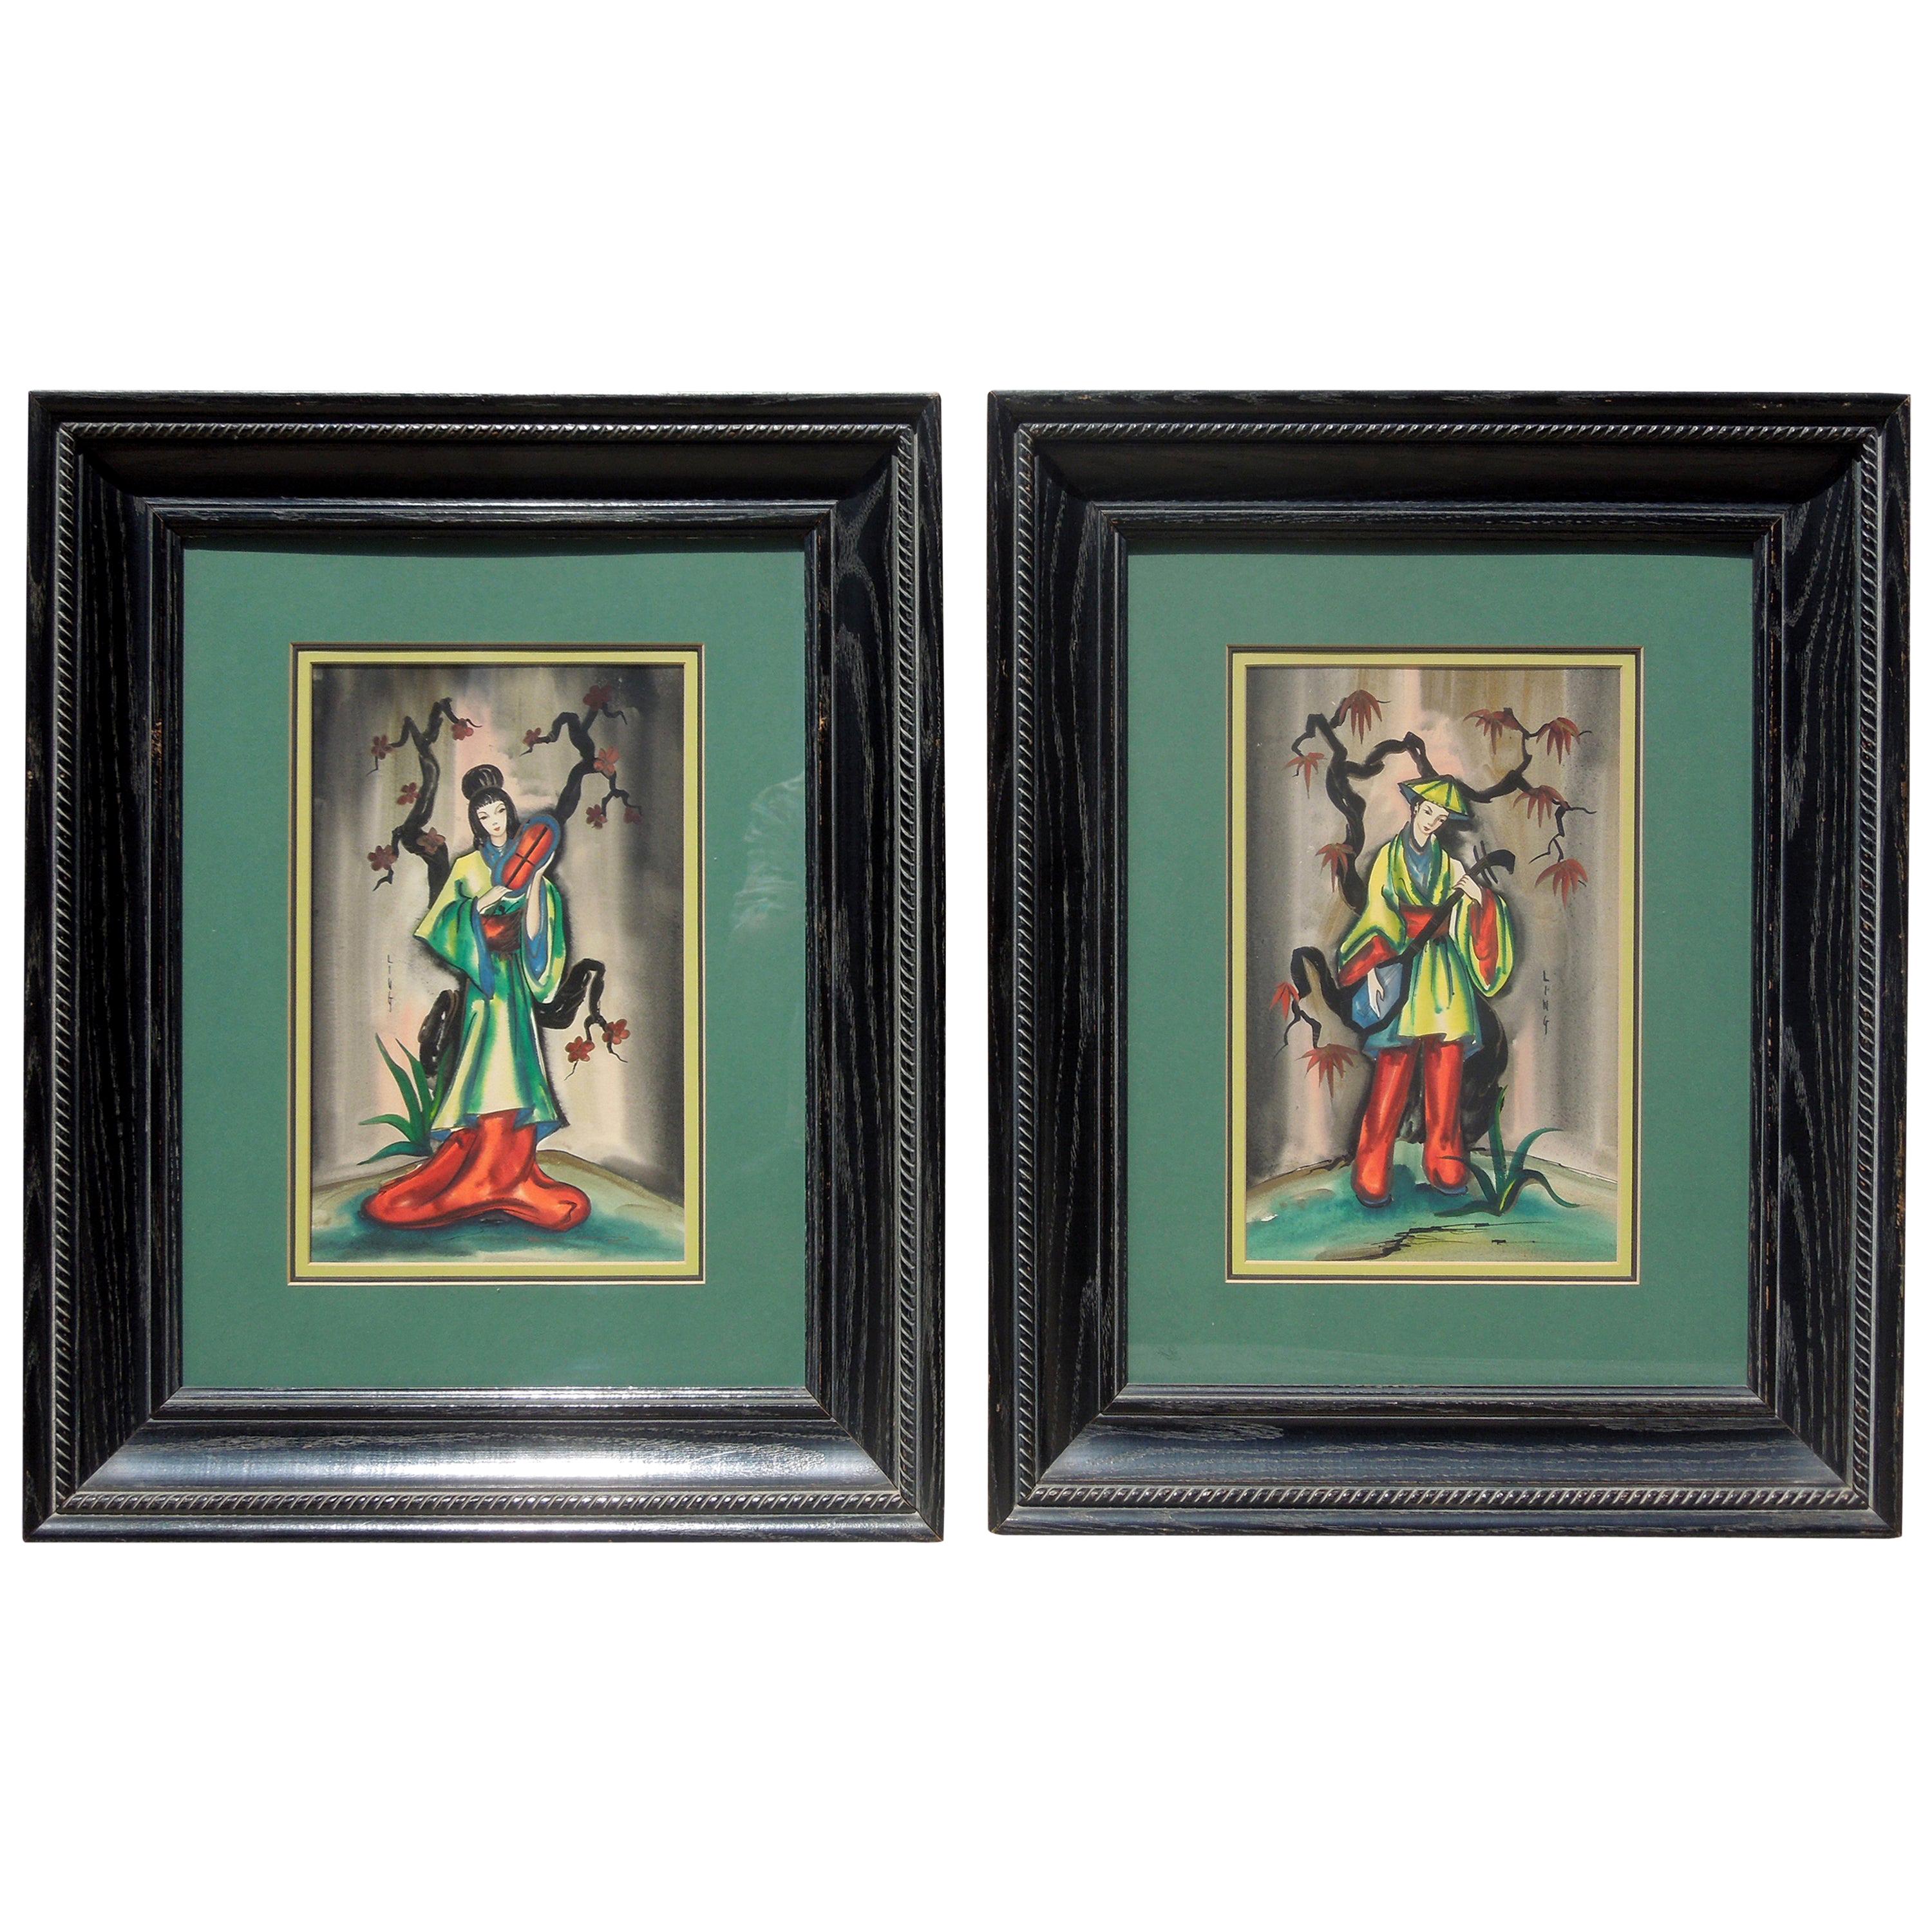 Pair of Vintage 1950s Chinoiserie Figure Original Paintings Signed Ling